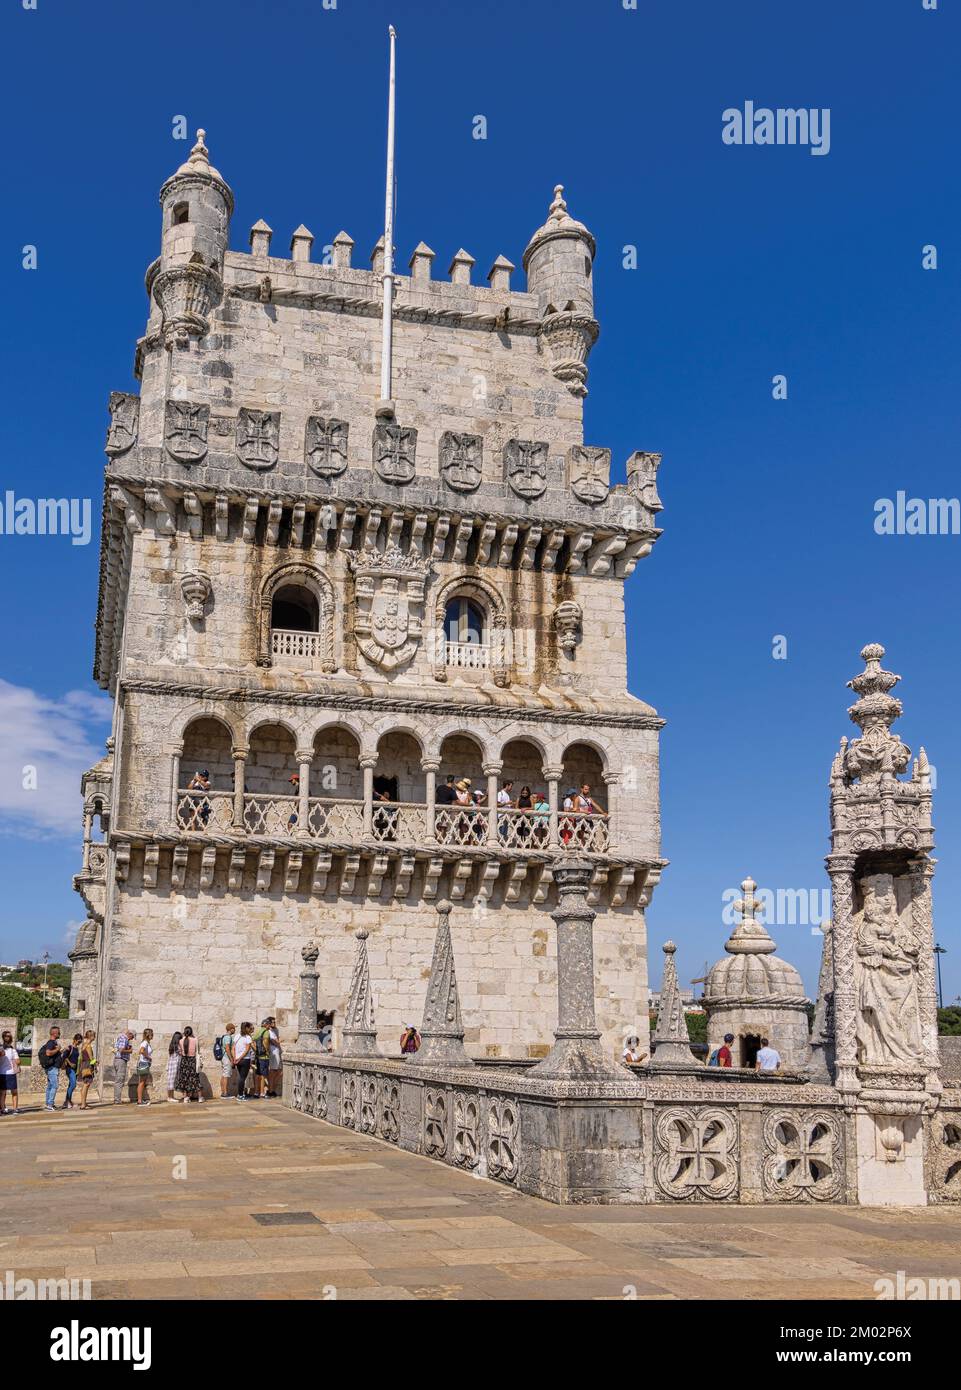 Lisbon, Portugal.  The 16th century Torre de Belem or Tower of Belem. The tower seen from the bulwark terrace. The tower is an important example of Ma Stock Photo